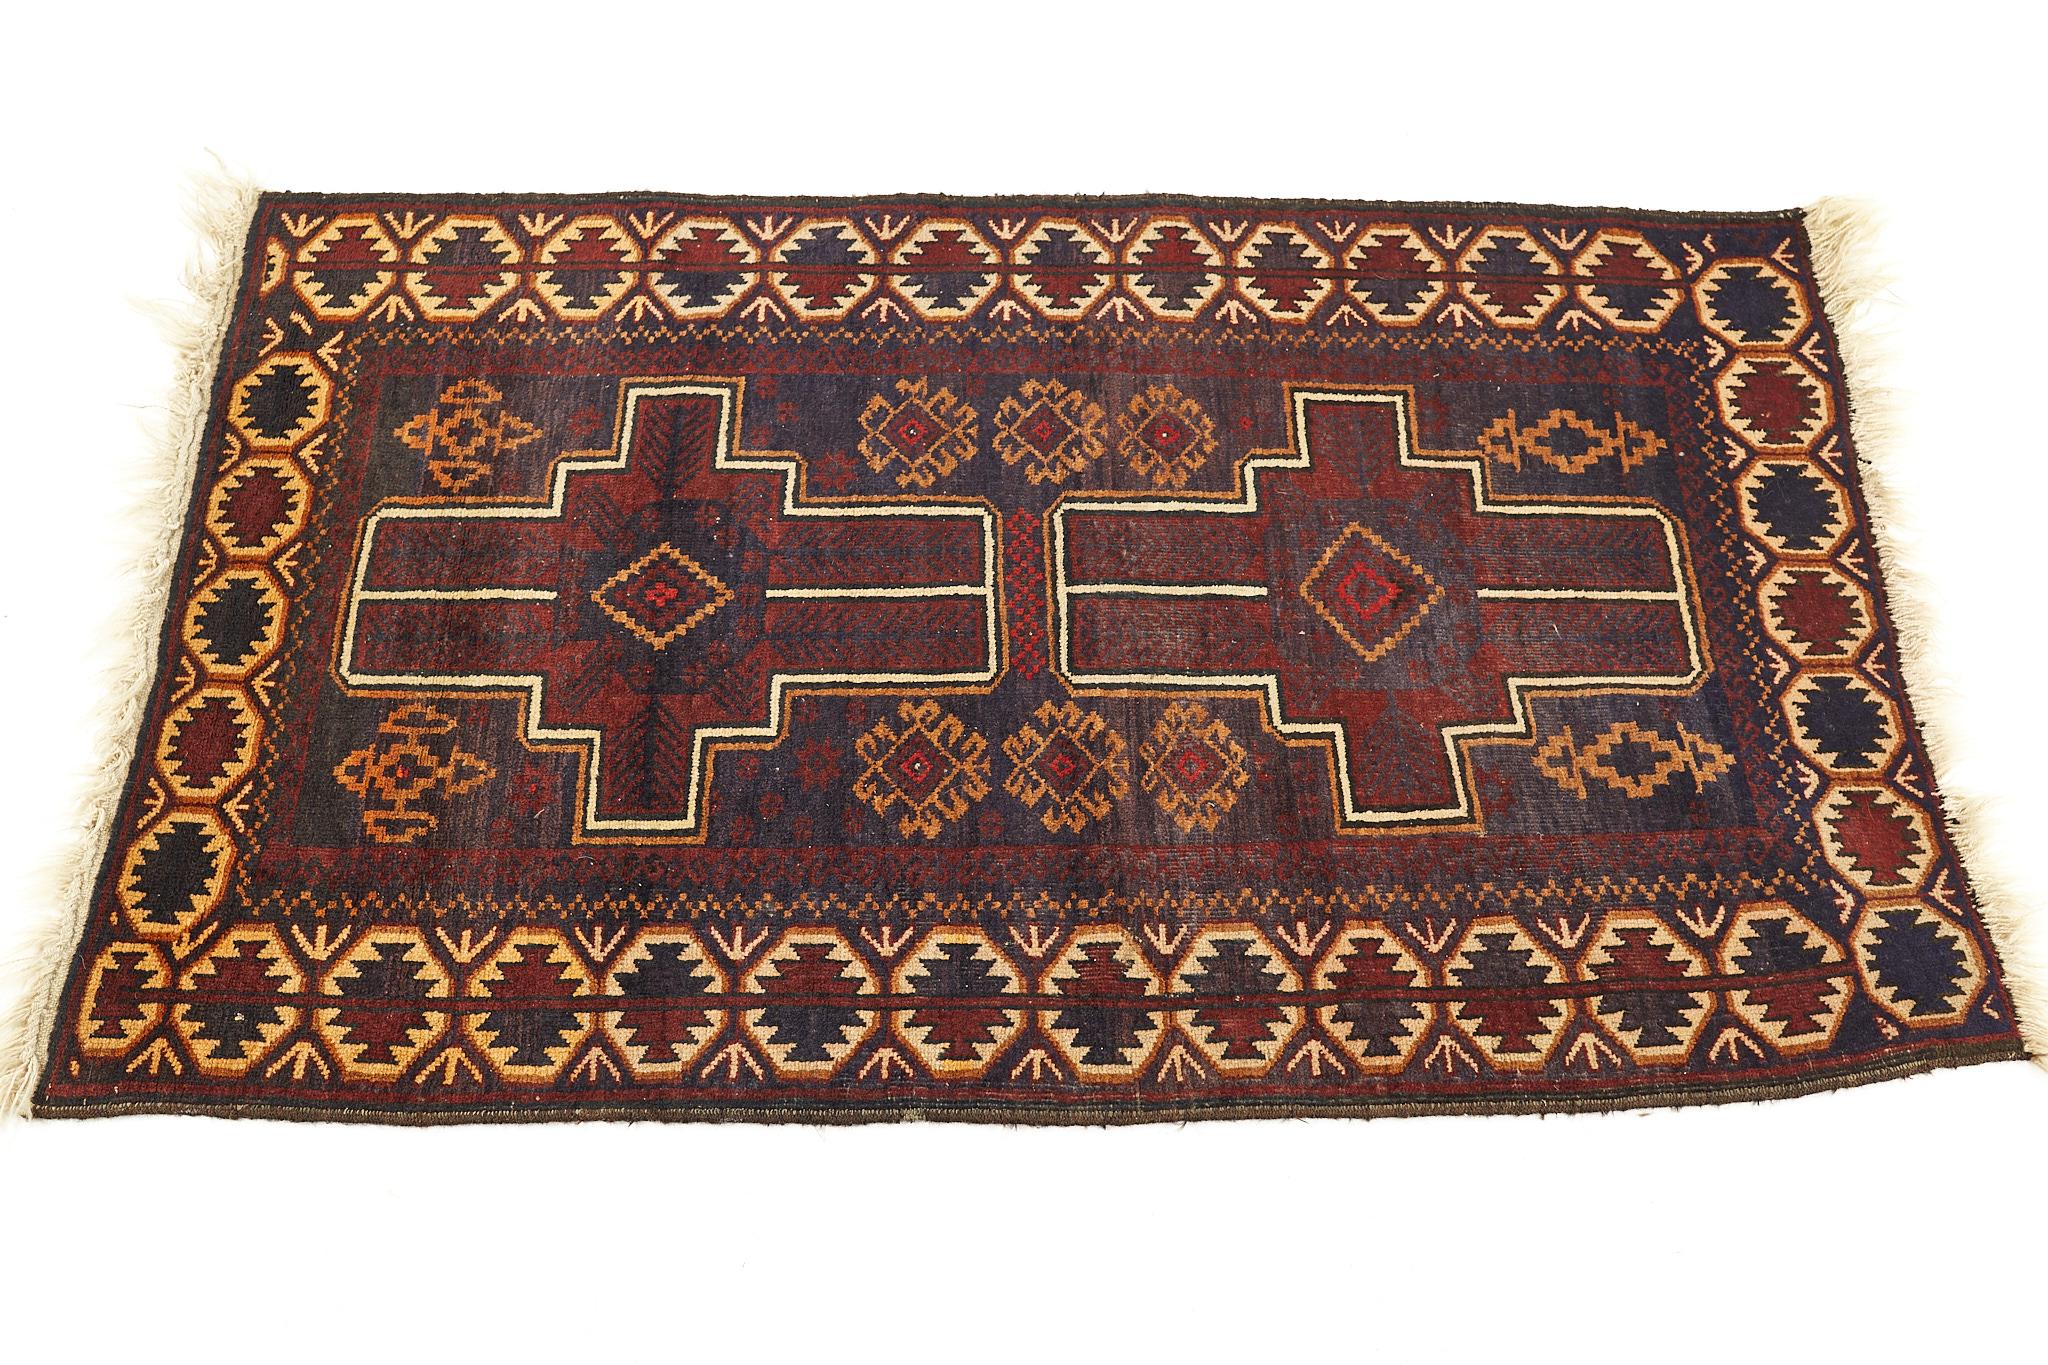 Mid century Aubergine medium pile wool rug

This rug is in good vintage condition

This rug measures: 63 wide x 39 inches deep

We take our photos in a controlled lighting studio to show as much detail as possible. We do not photoshop out